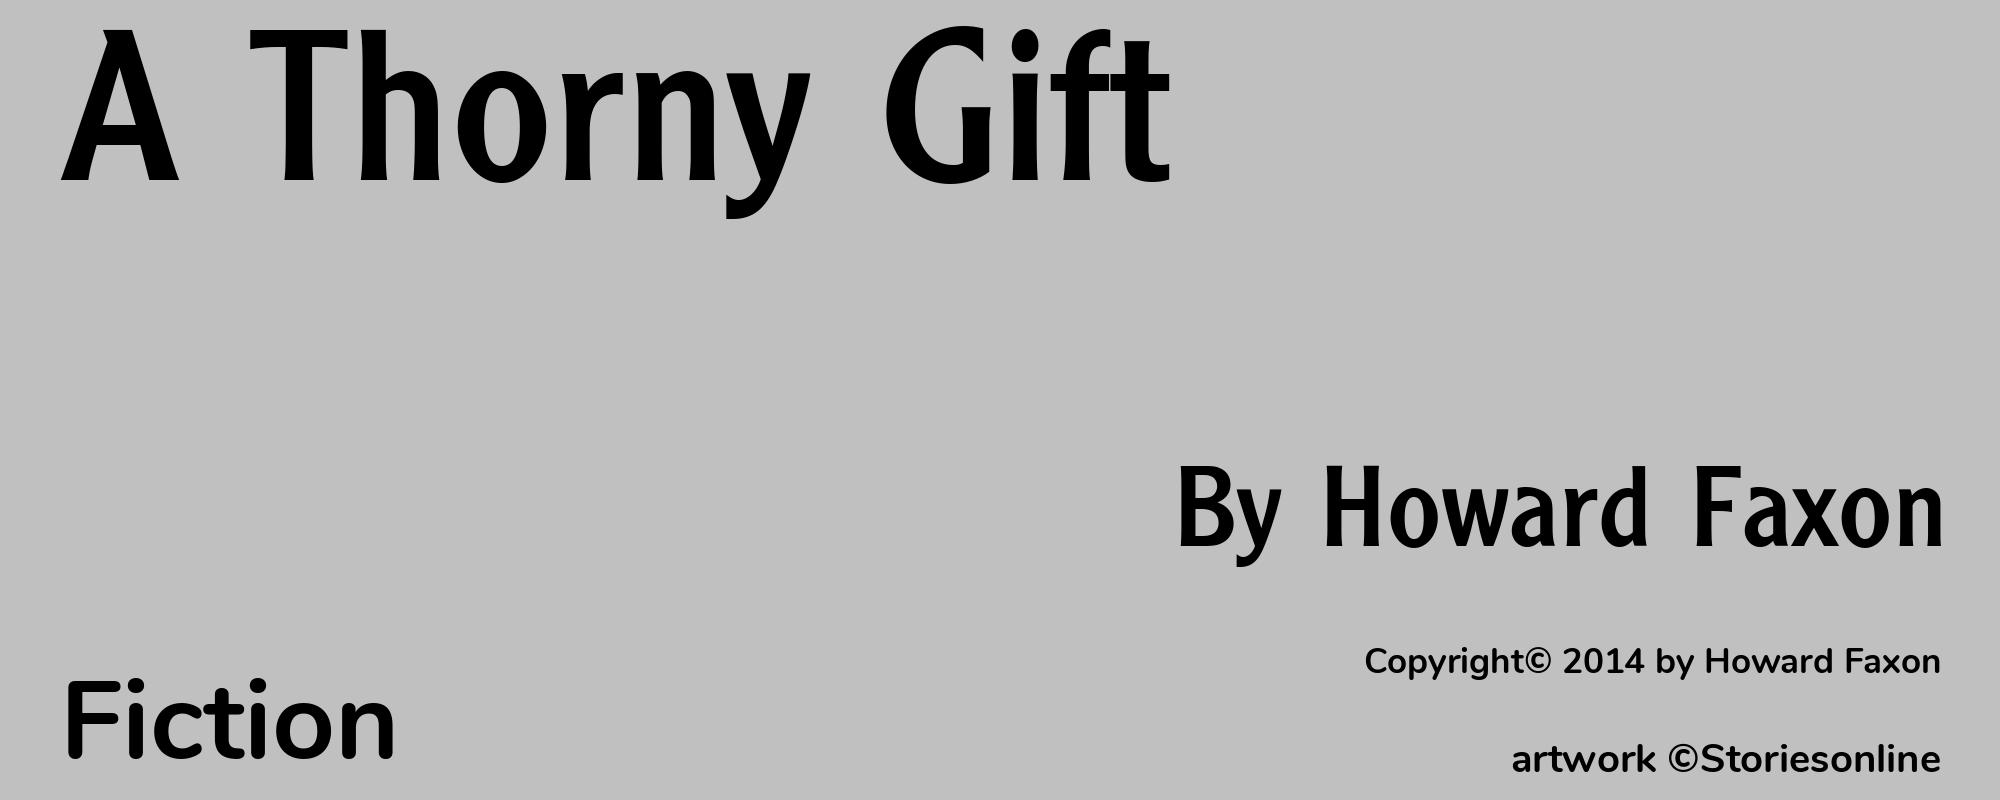 A Thorny Gift - Cover